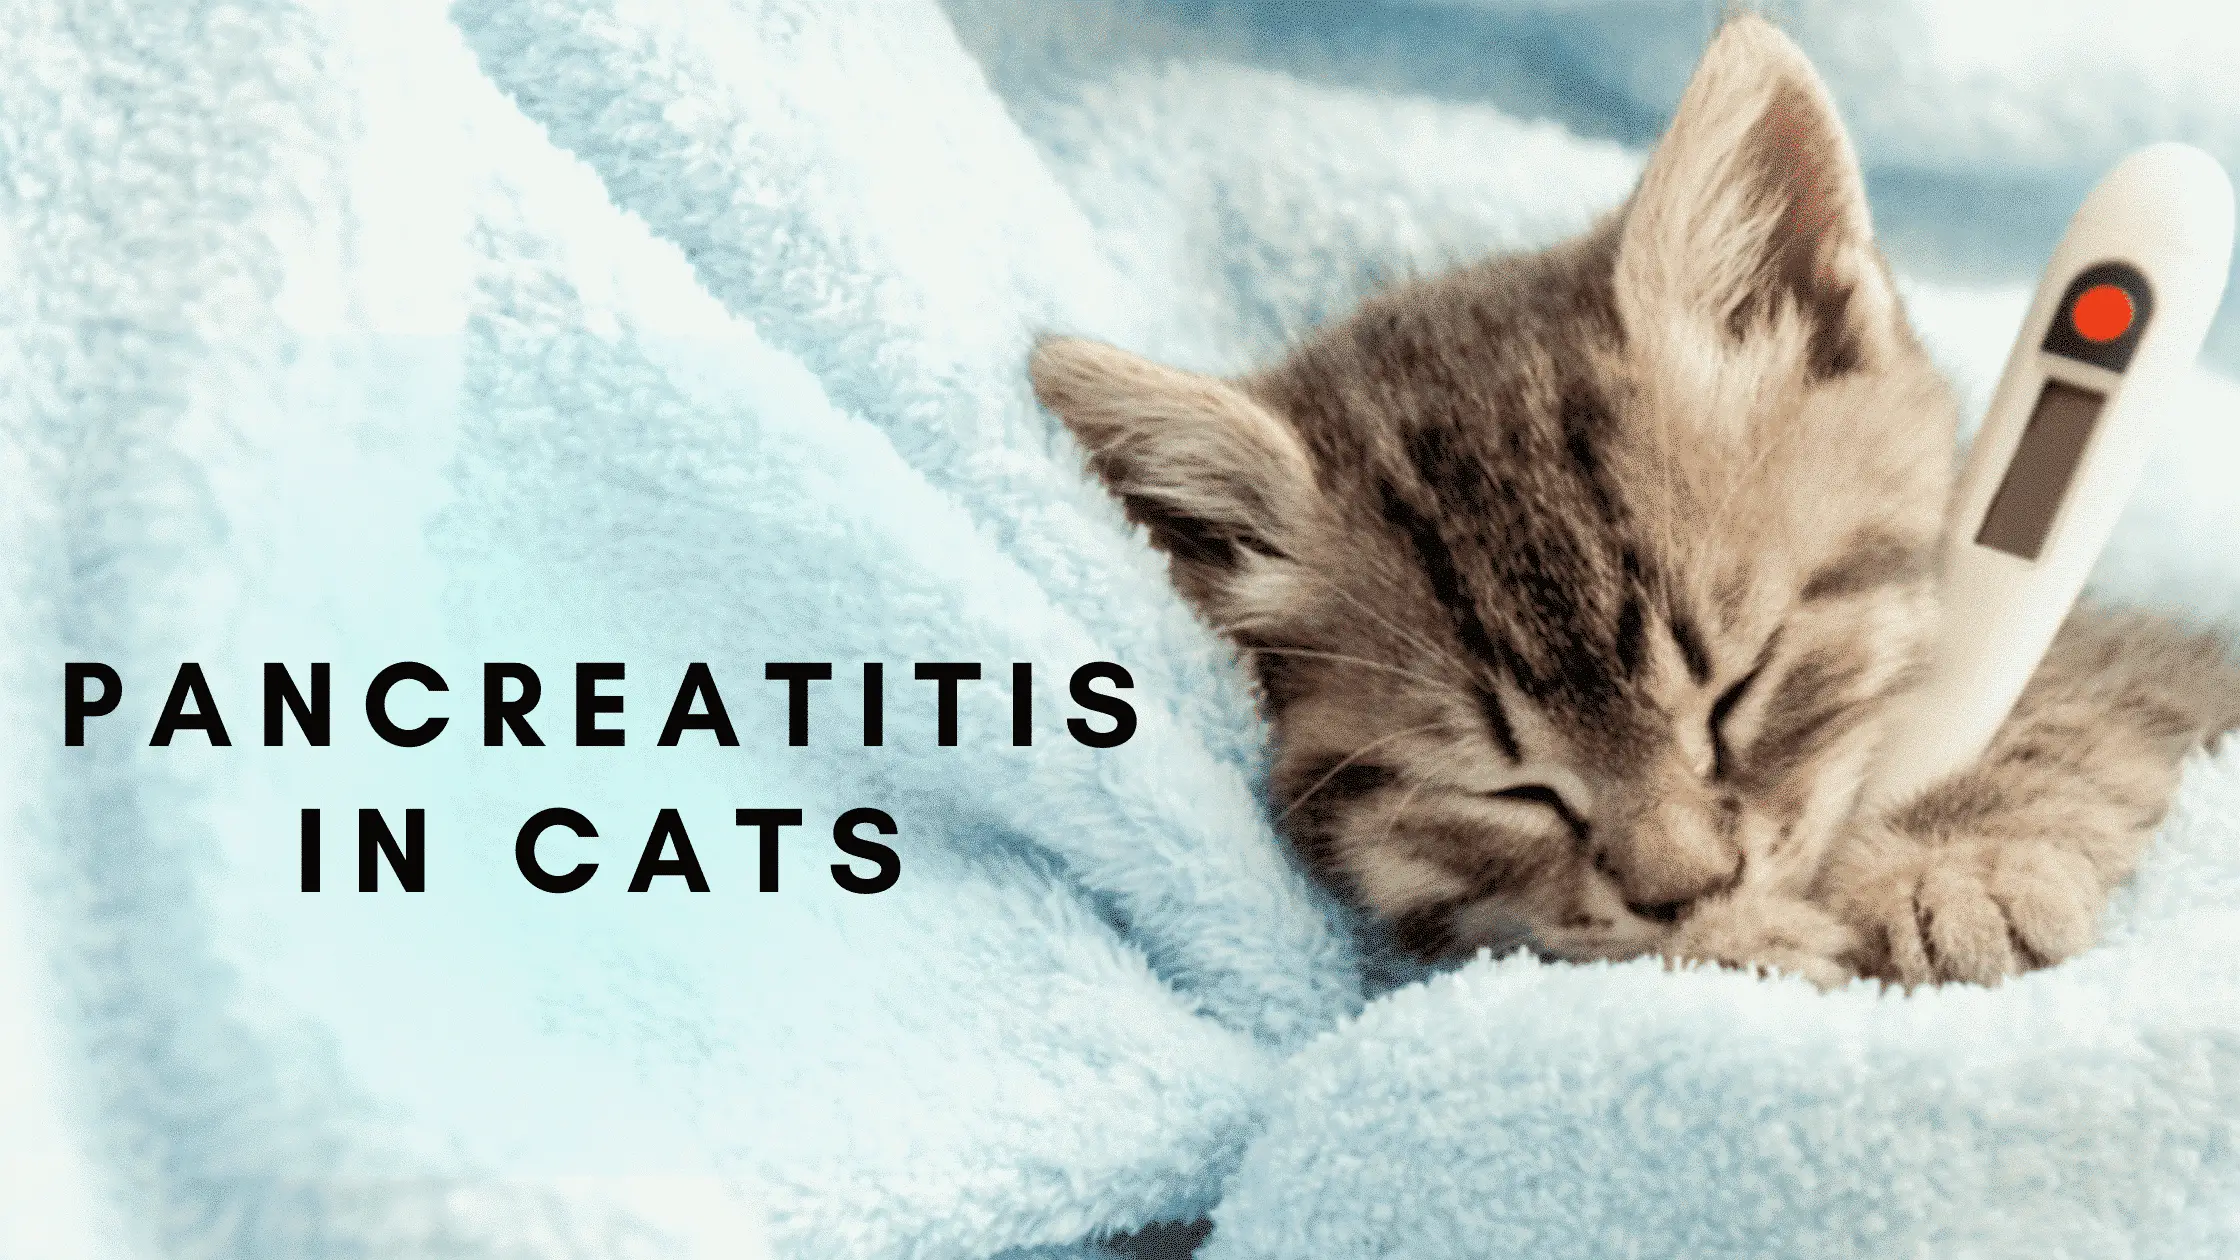 Pancreatitis in cats – Causes, Symptoms, and Treatment